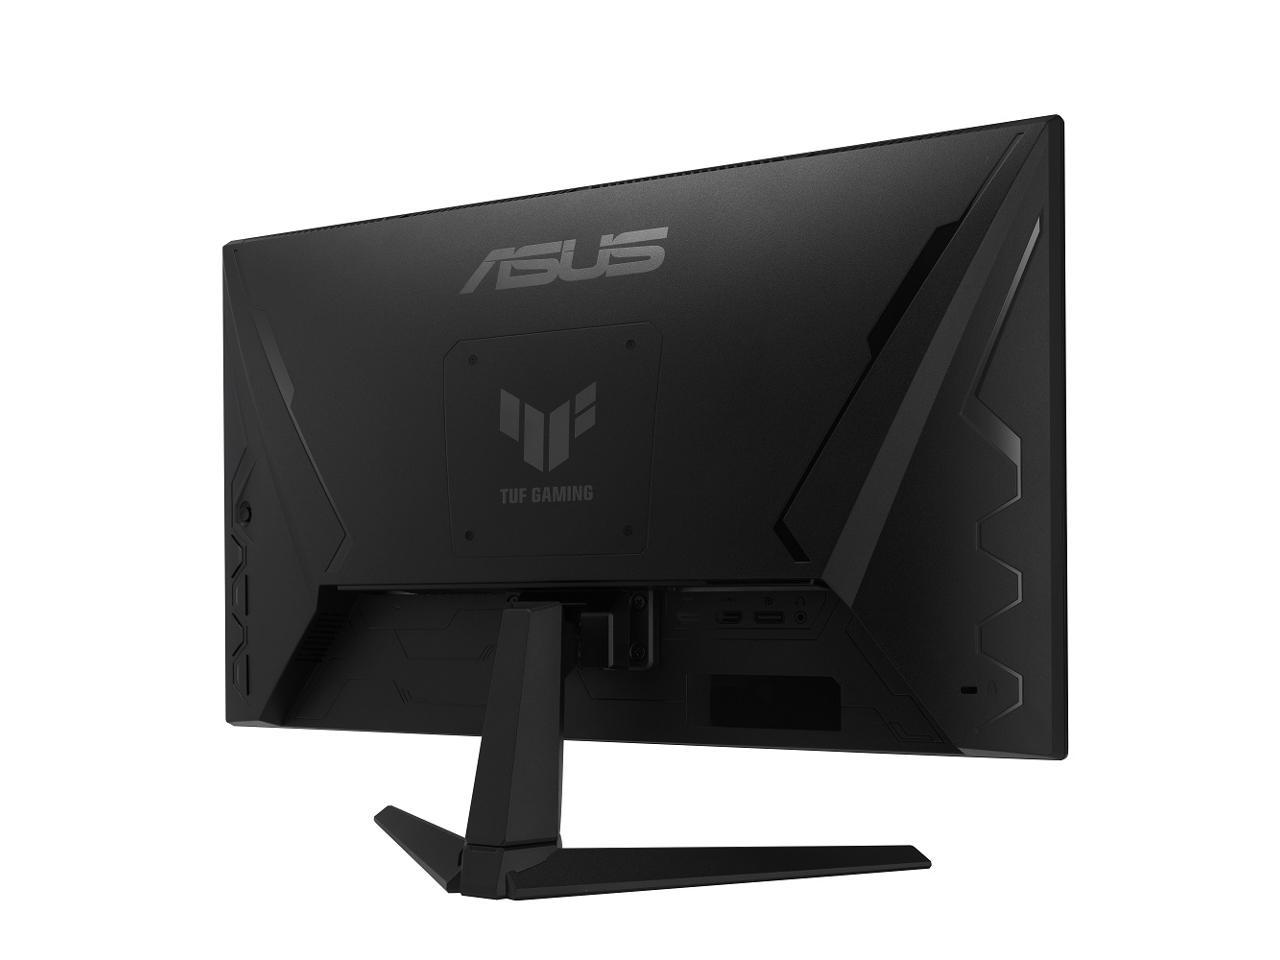 ASUS TUF Gaming 24" (23.8â€? Viewable) 1080P Monitor (VG249QM1A) - Full HD, Fast IPS, 270Hz, 1ms, Extreme Low Motion Blur, Speakers, 99% sRGB, G-Sync compatible/FreeSync Premium, DisplayPort, HDMI